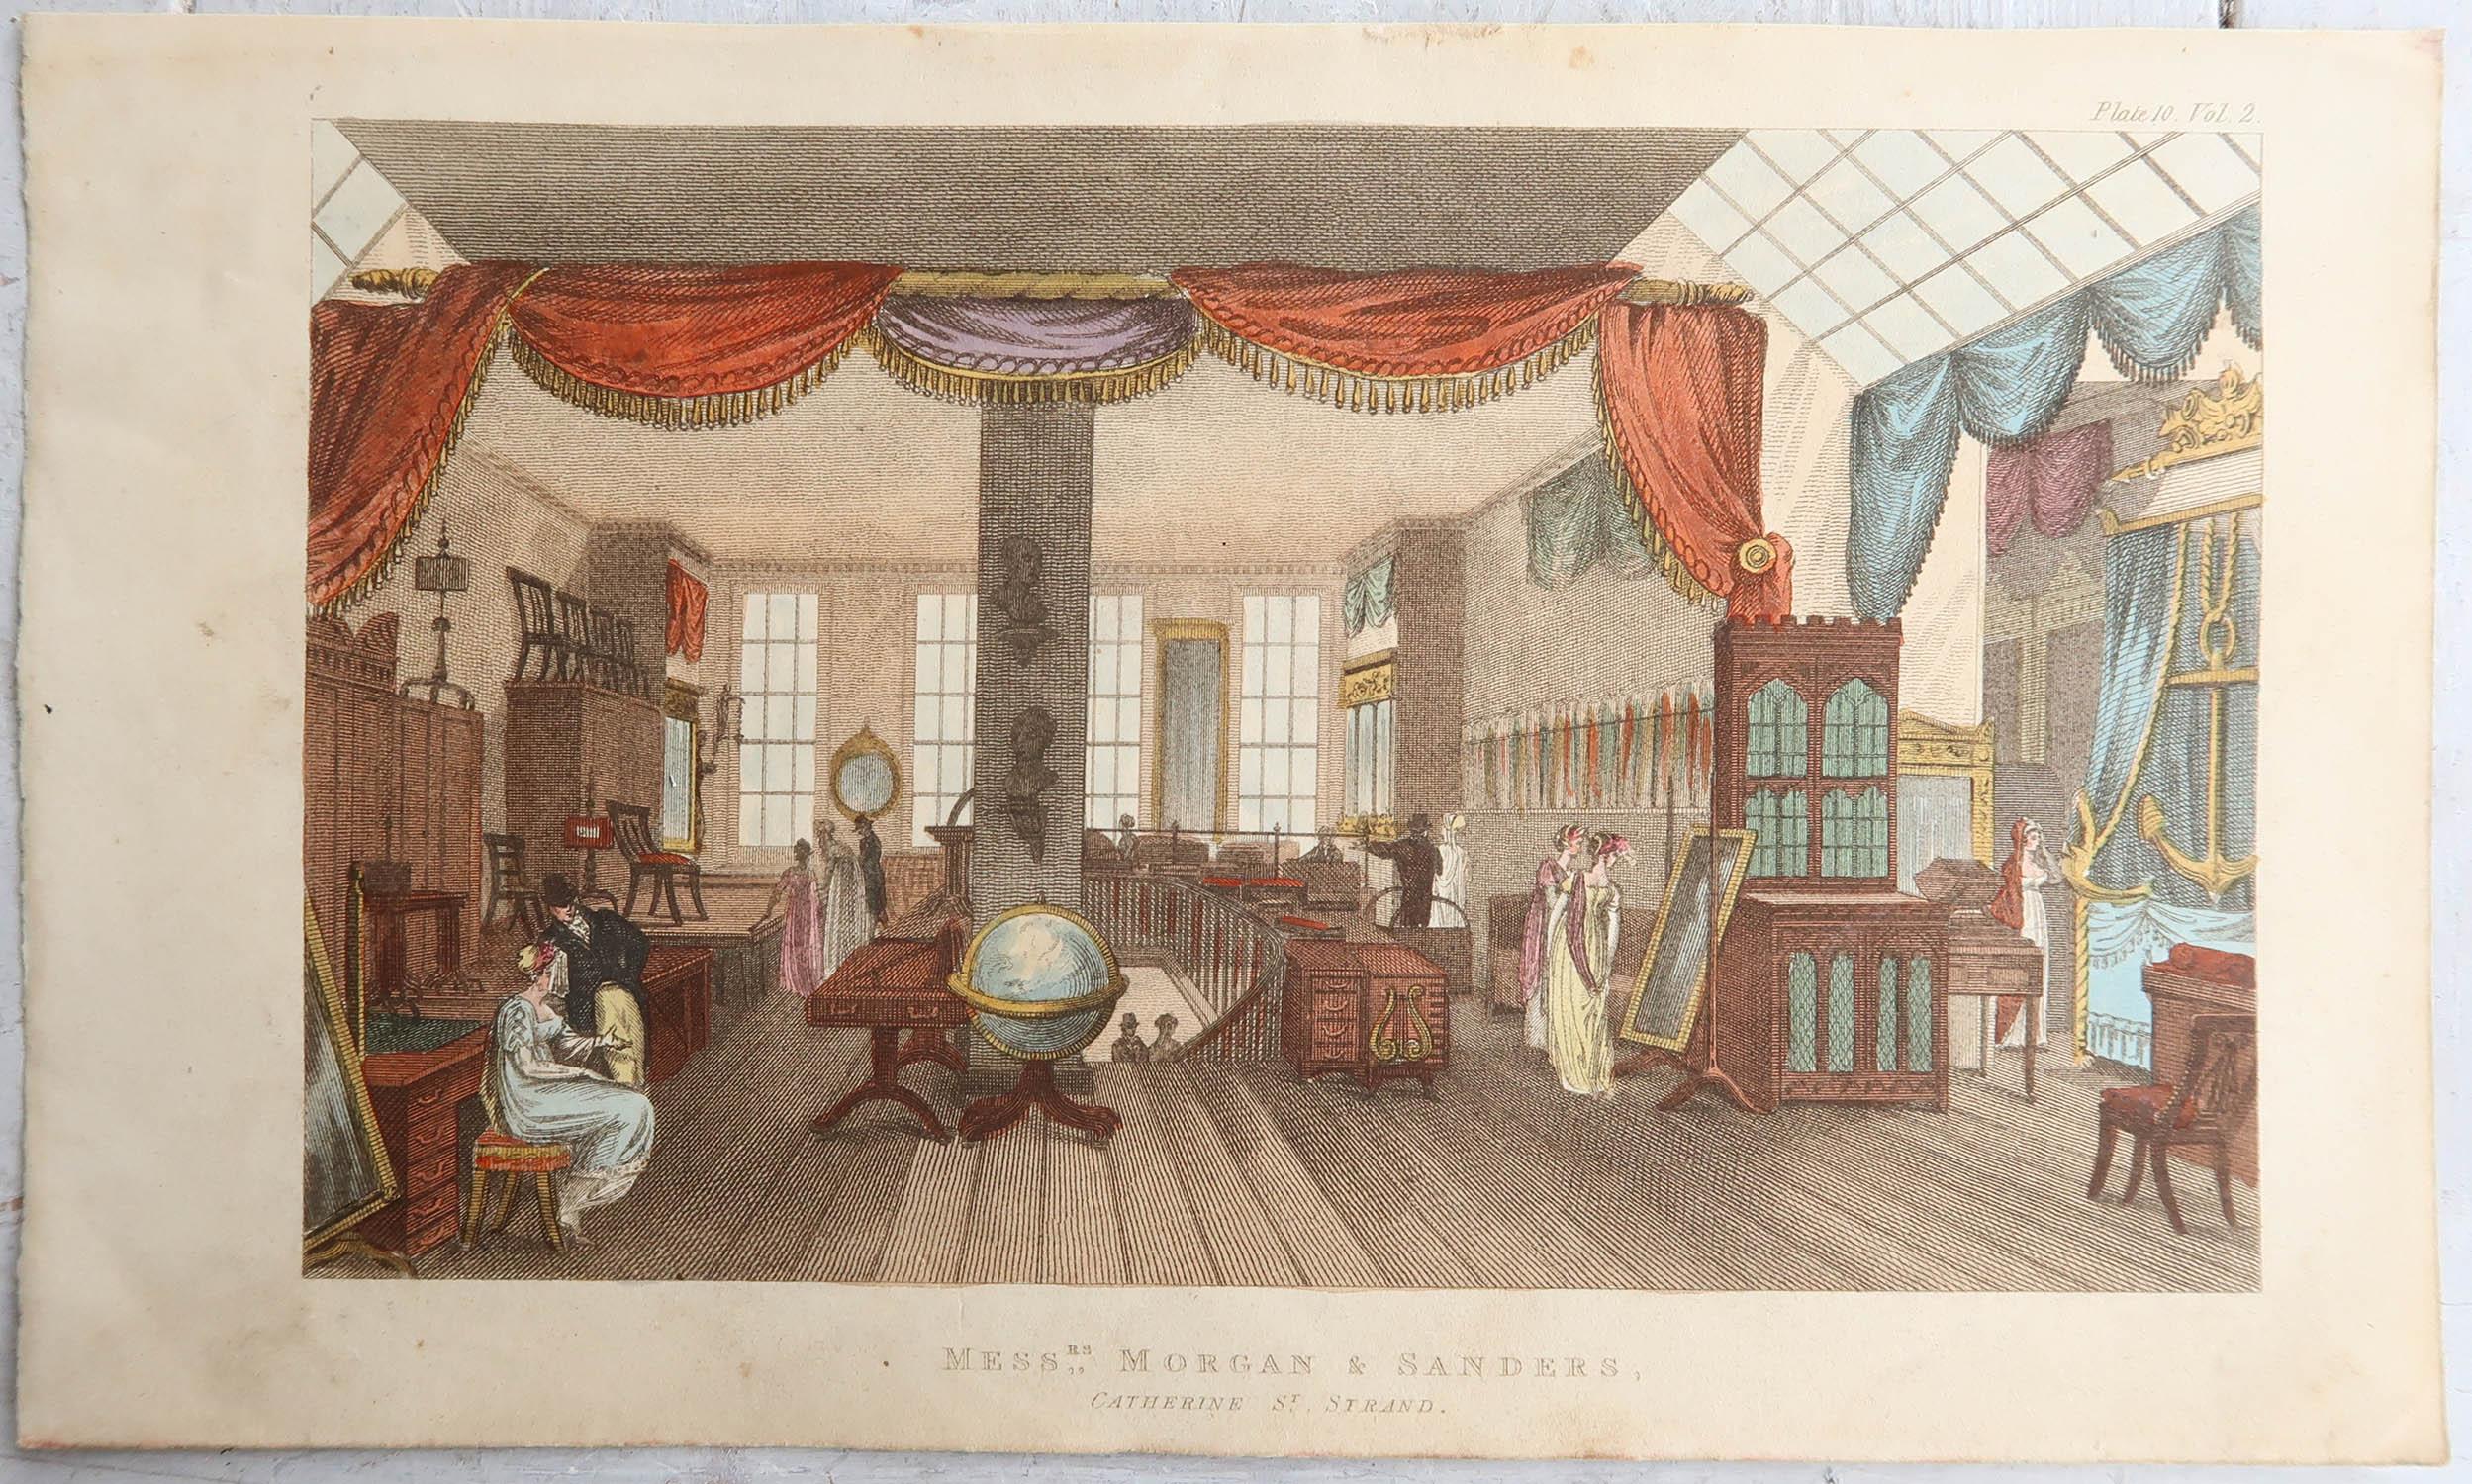 Other Set of 6 Original Antique Prints of London Shop Interiors, Dated 1809